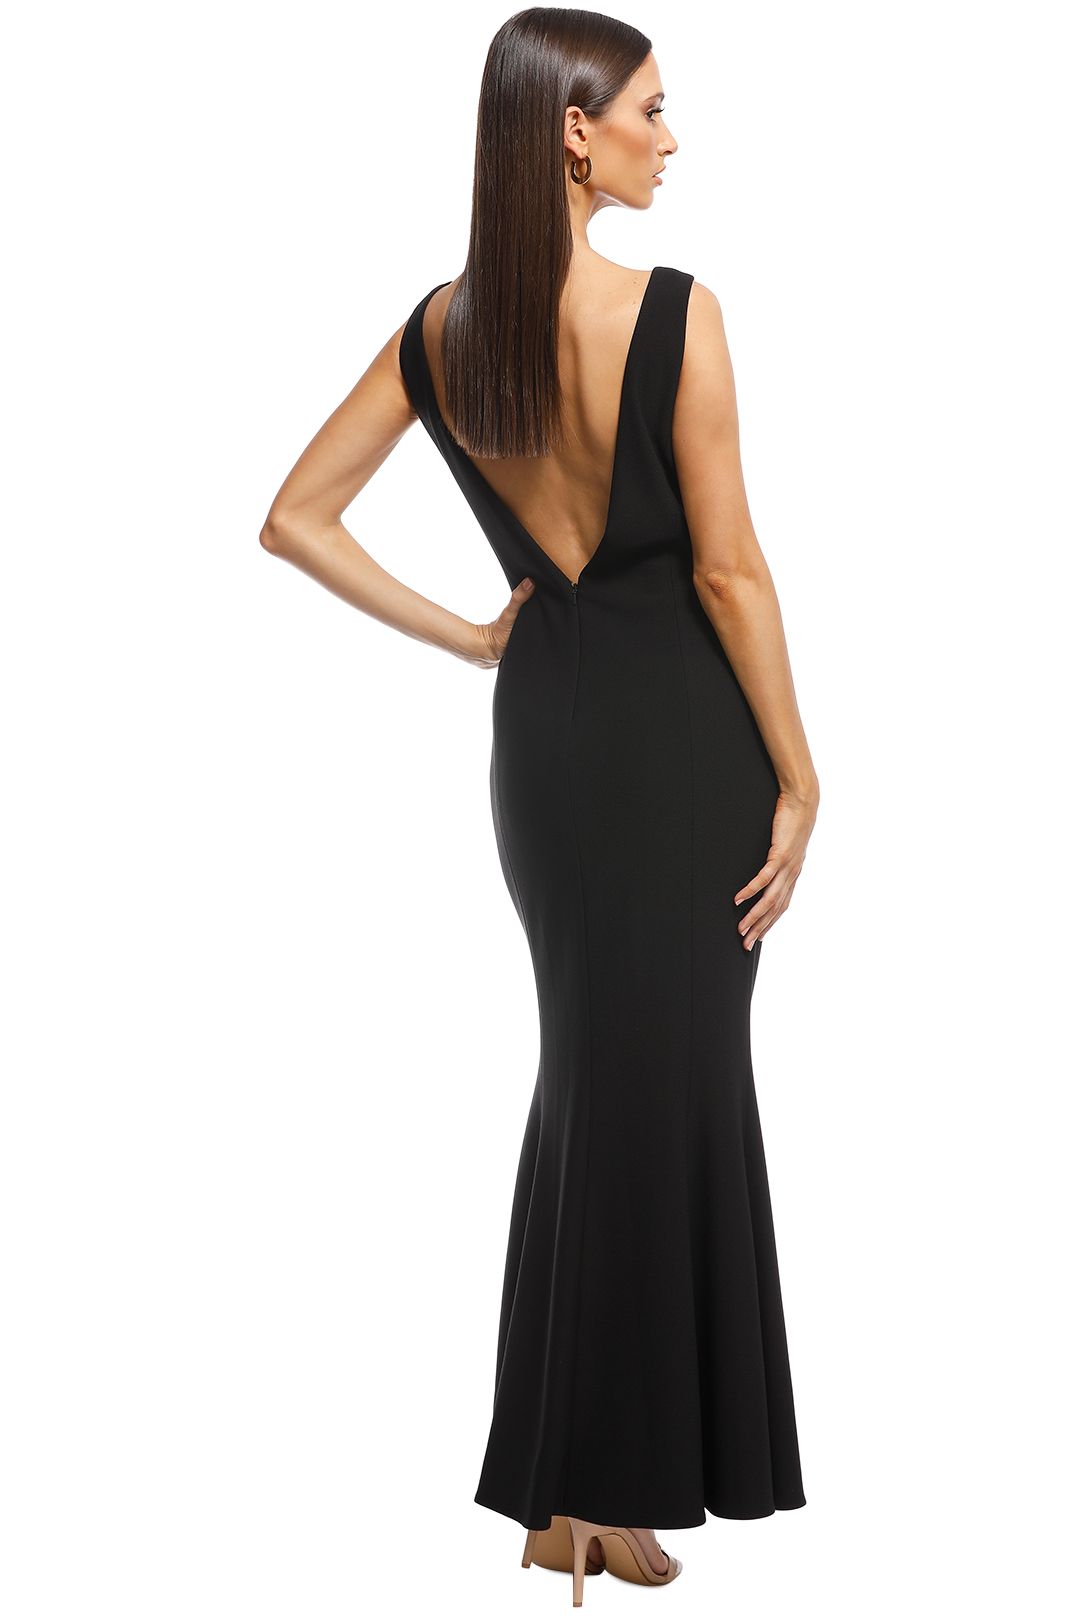 Grace and Hart - Eternal Obsession Gown - Black - Back